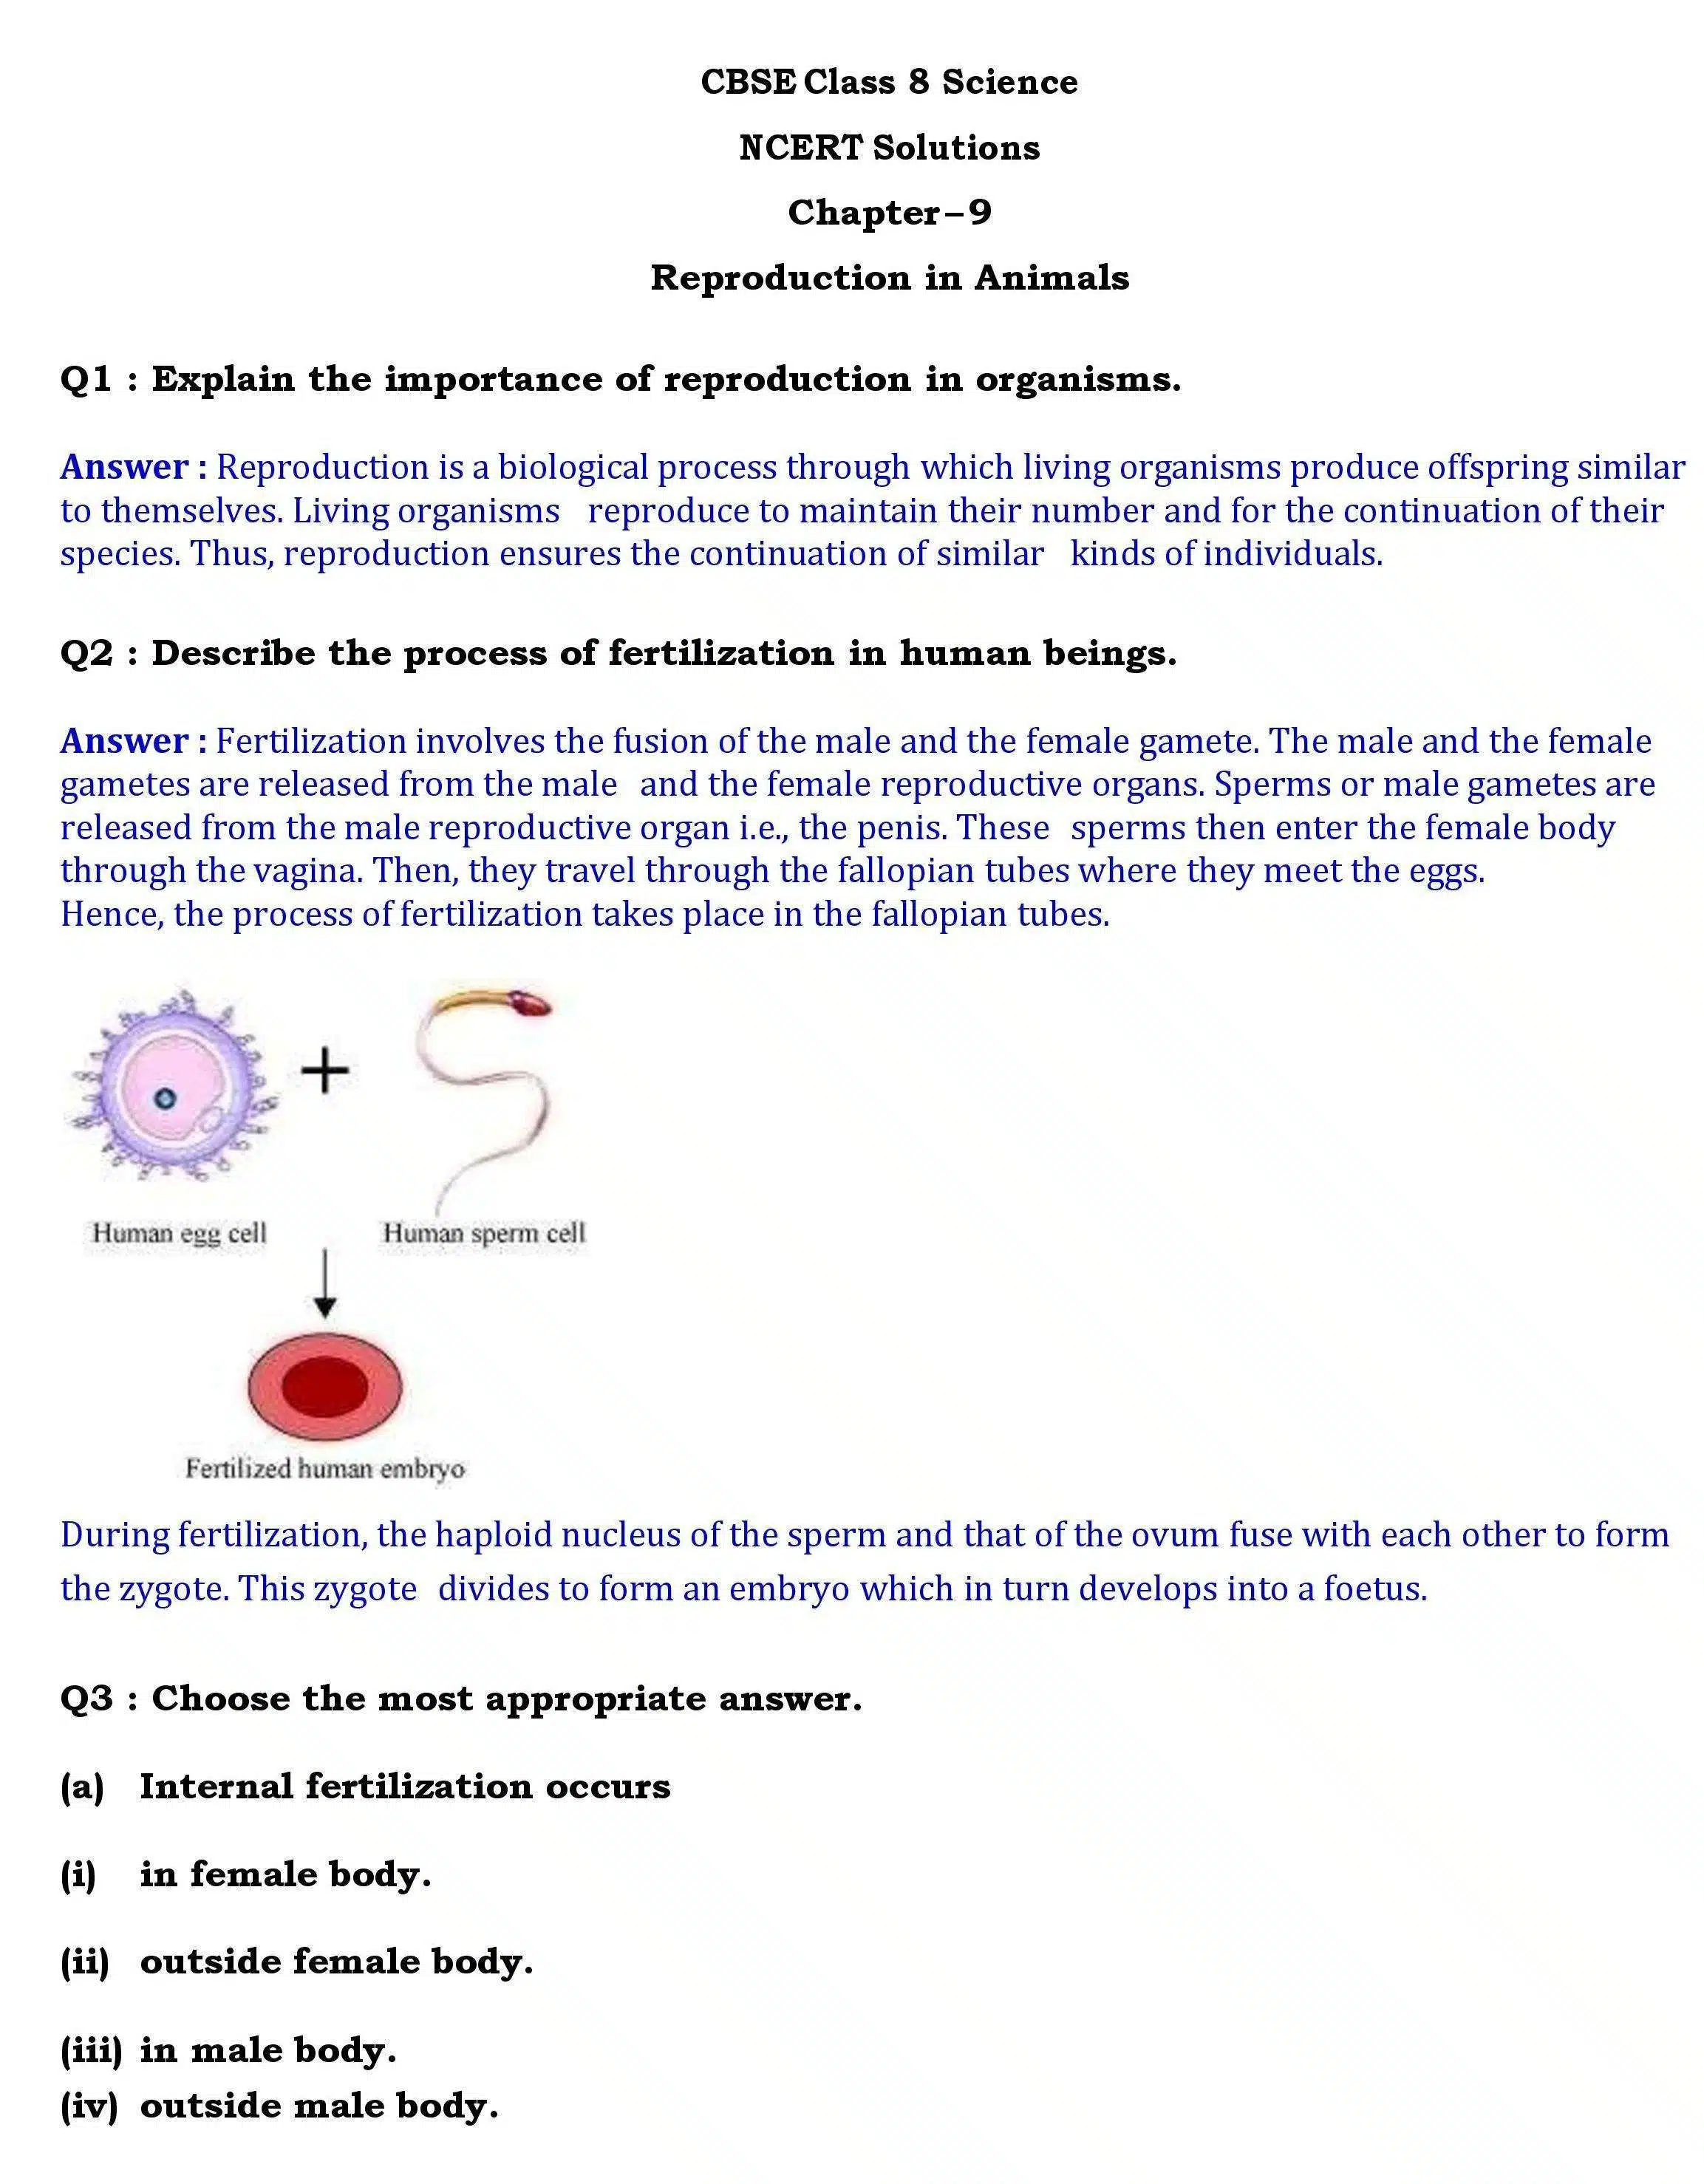 NCERT Solutions for Class 8 Science Chapter 9 page 001